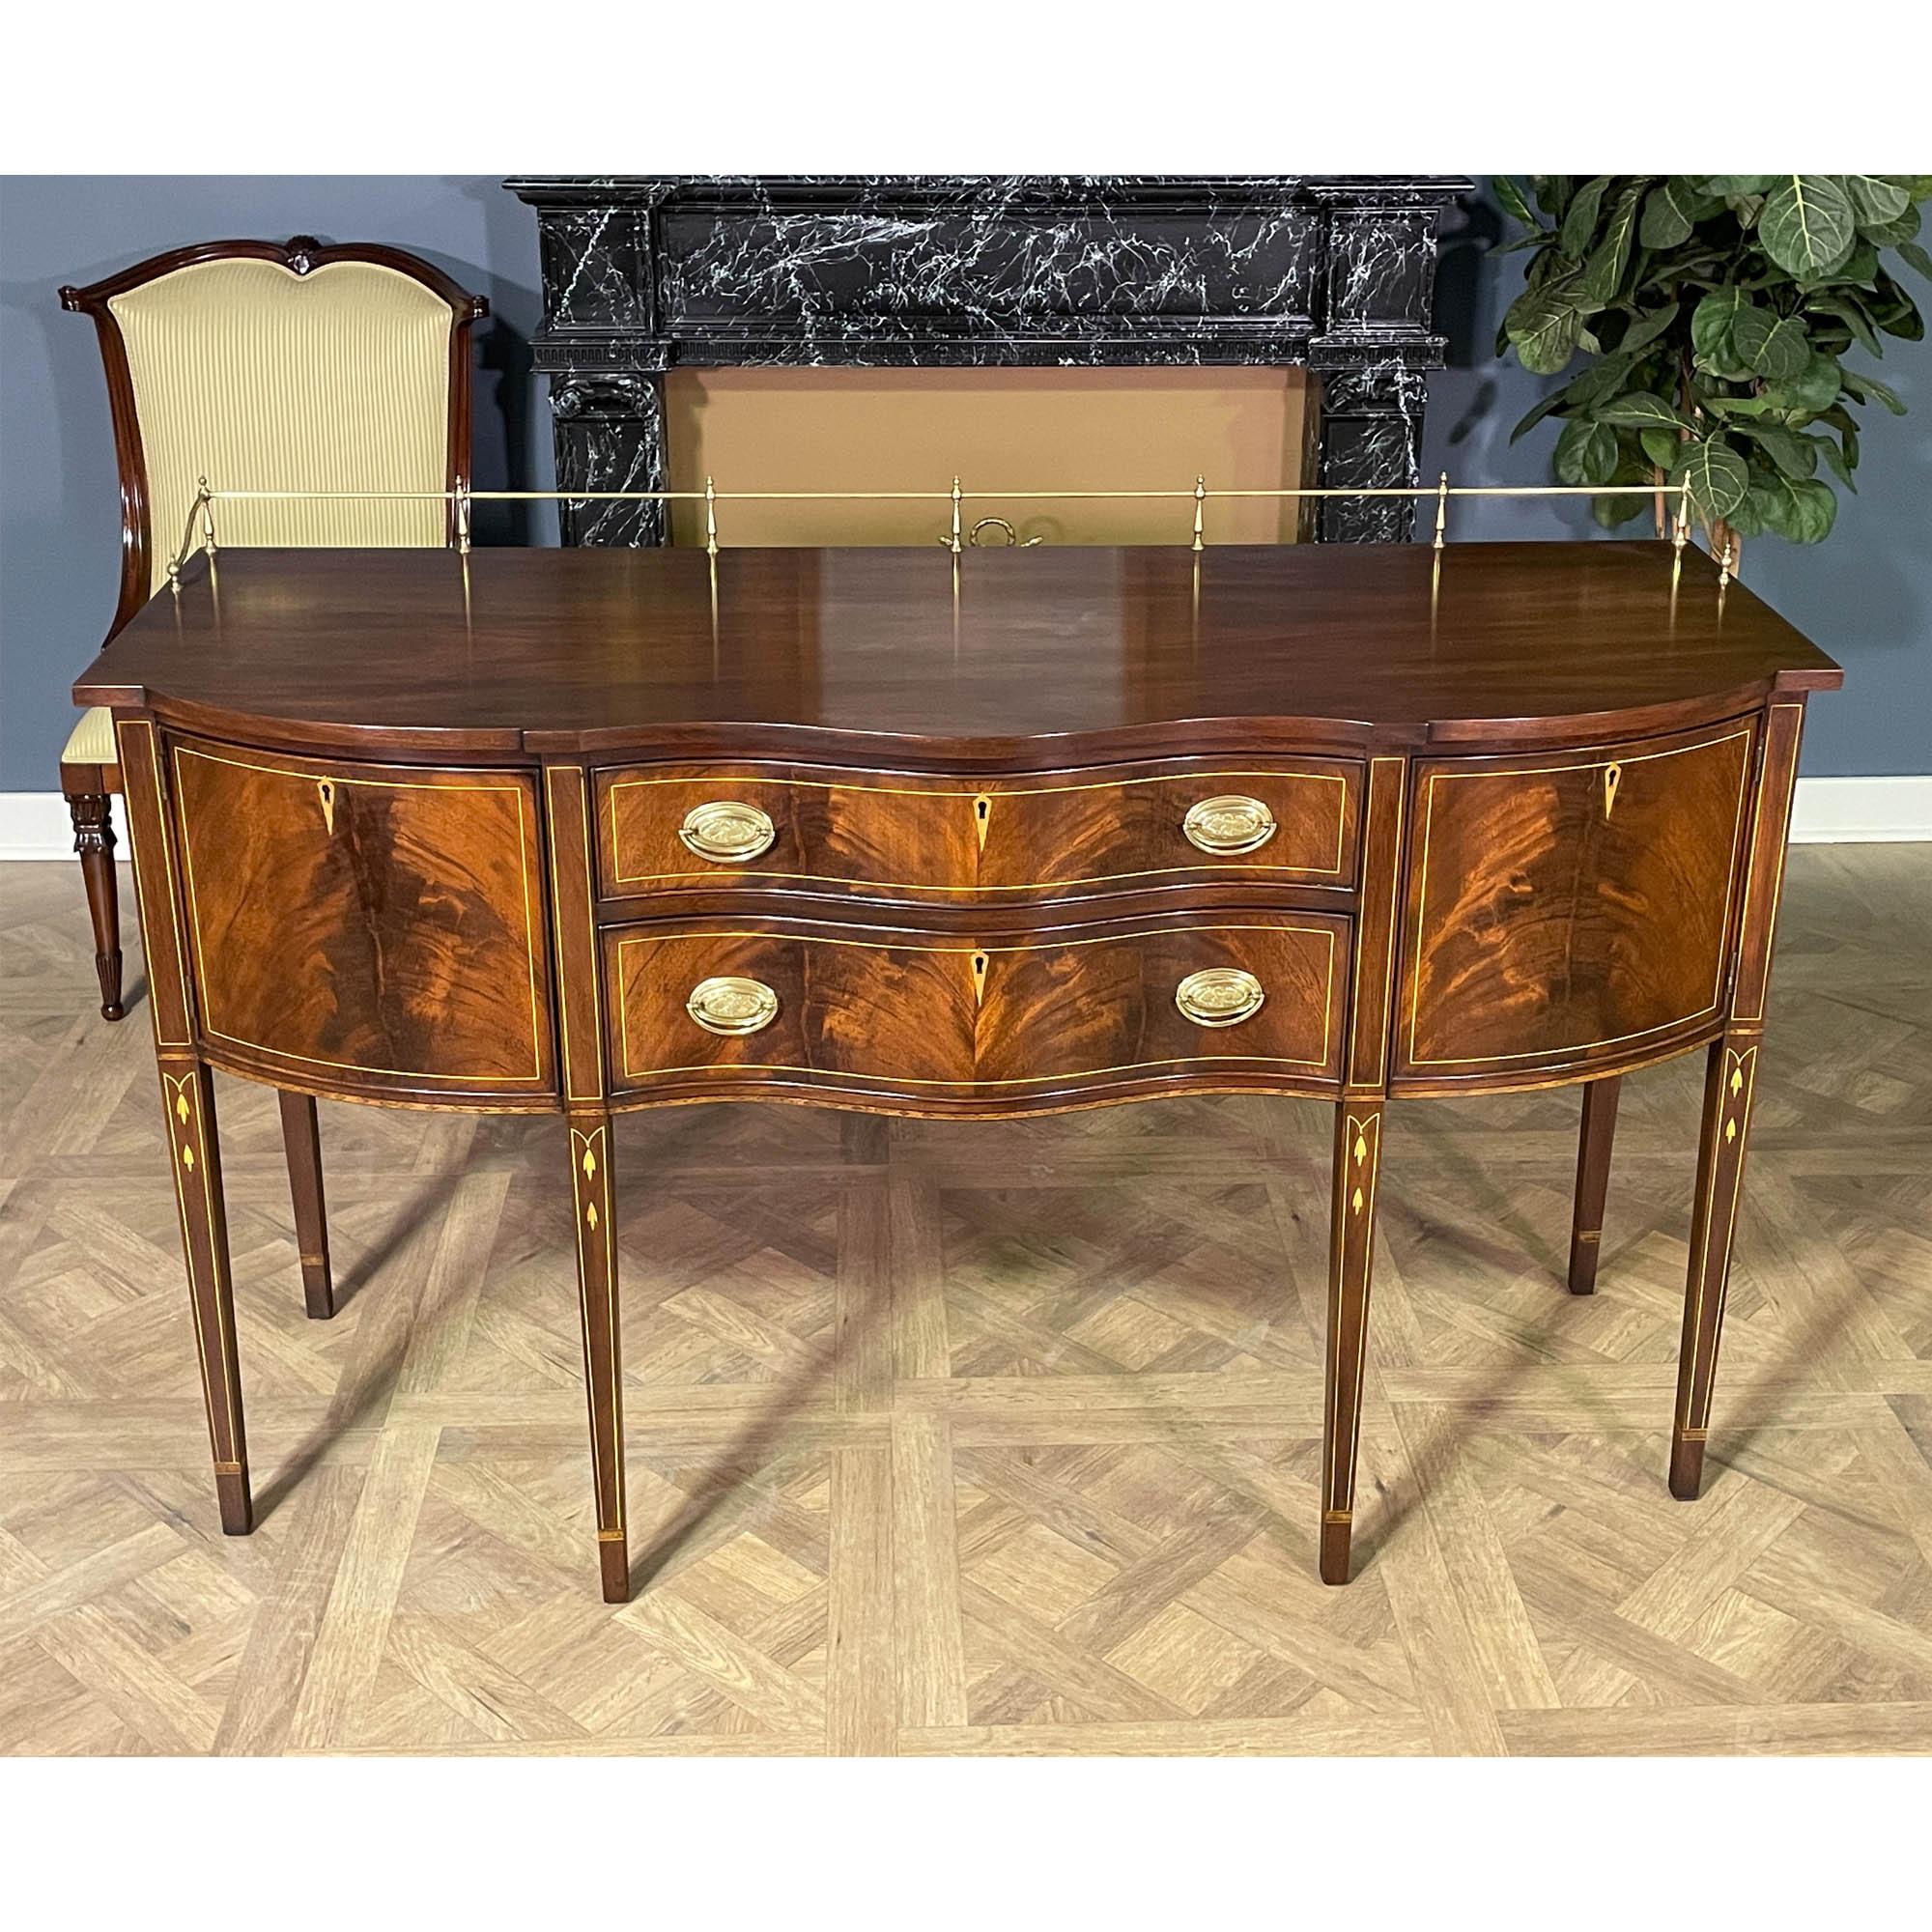 From Niagara Furniture a vintage Henkel Harris Sideboard in excellent original, as found, condition.

Simple yet sophisticated this beautiful Henkel Harris Sideboard has everything going for it. A slightly deeper size than many other high leg